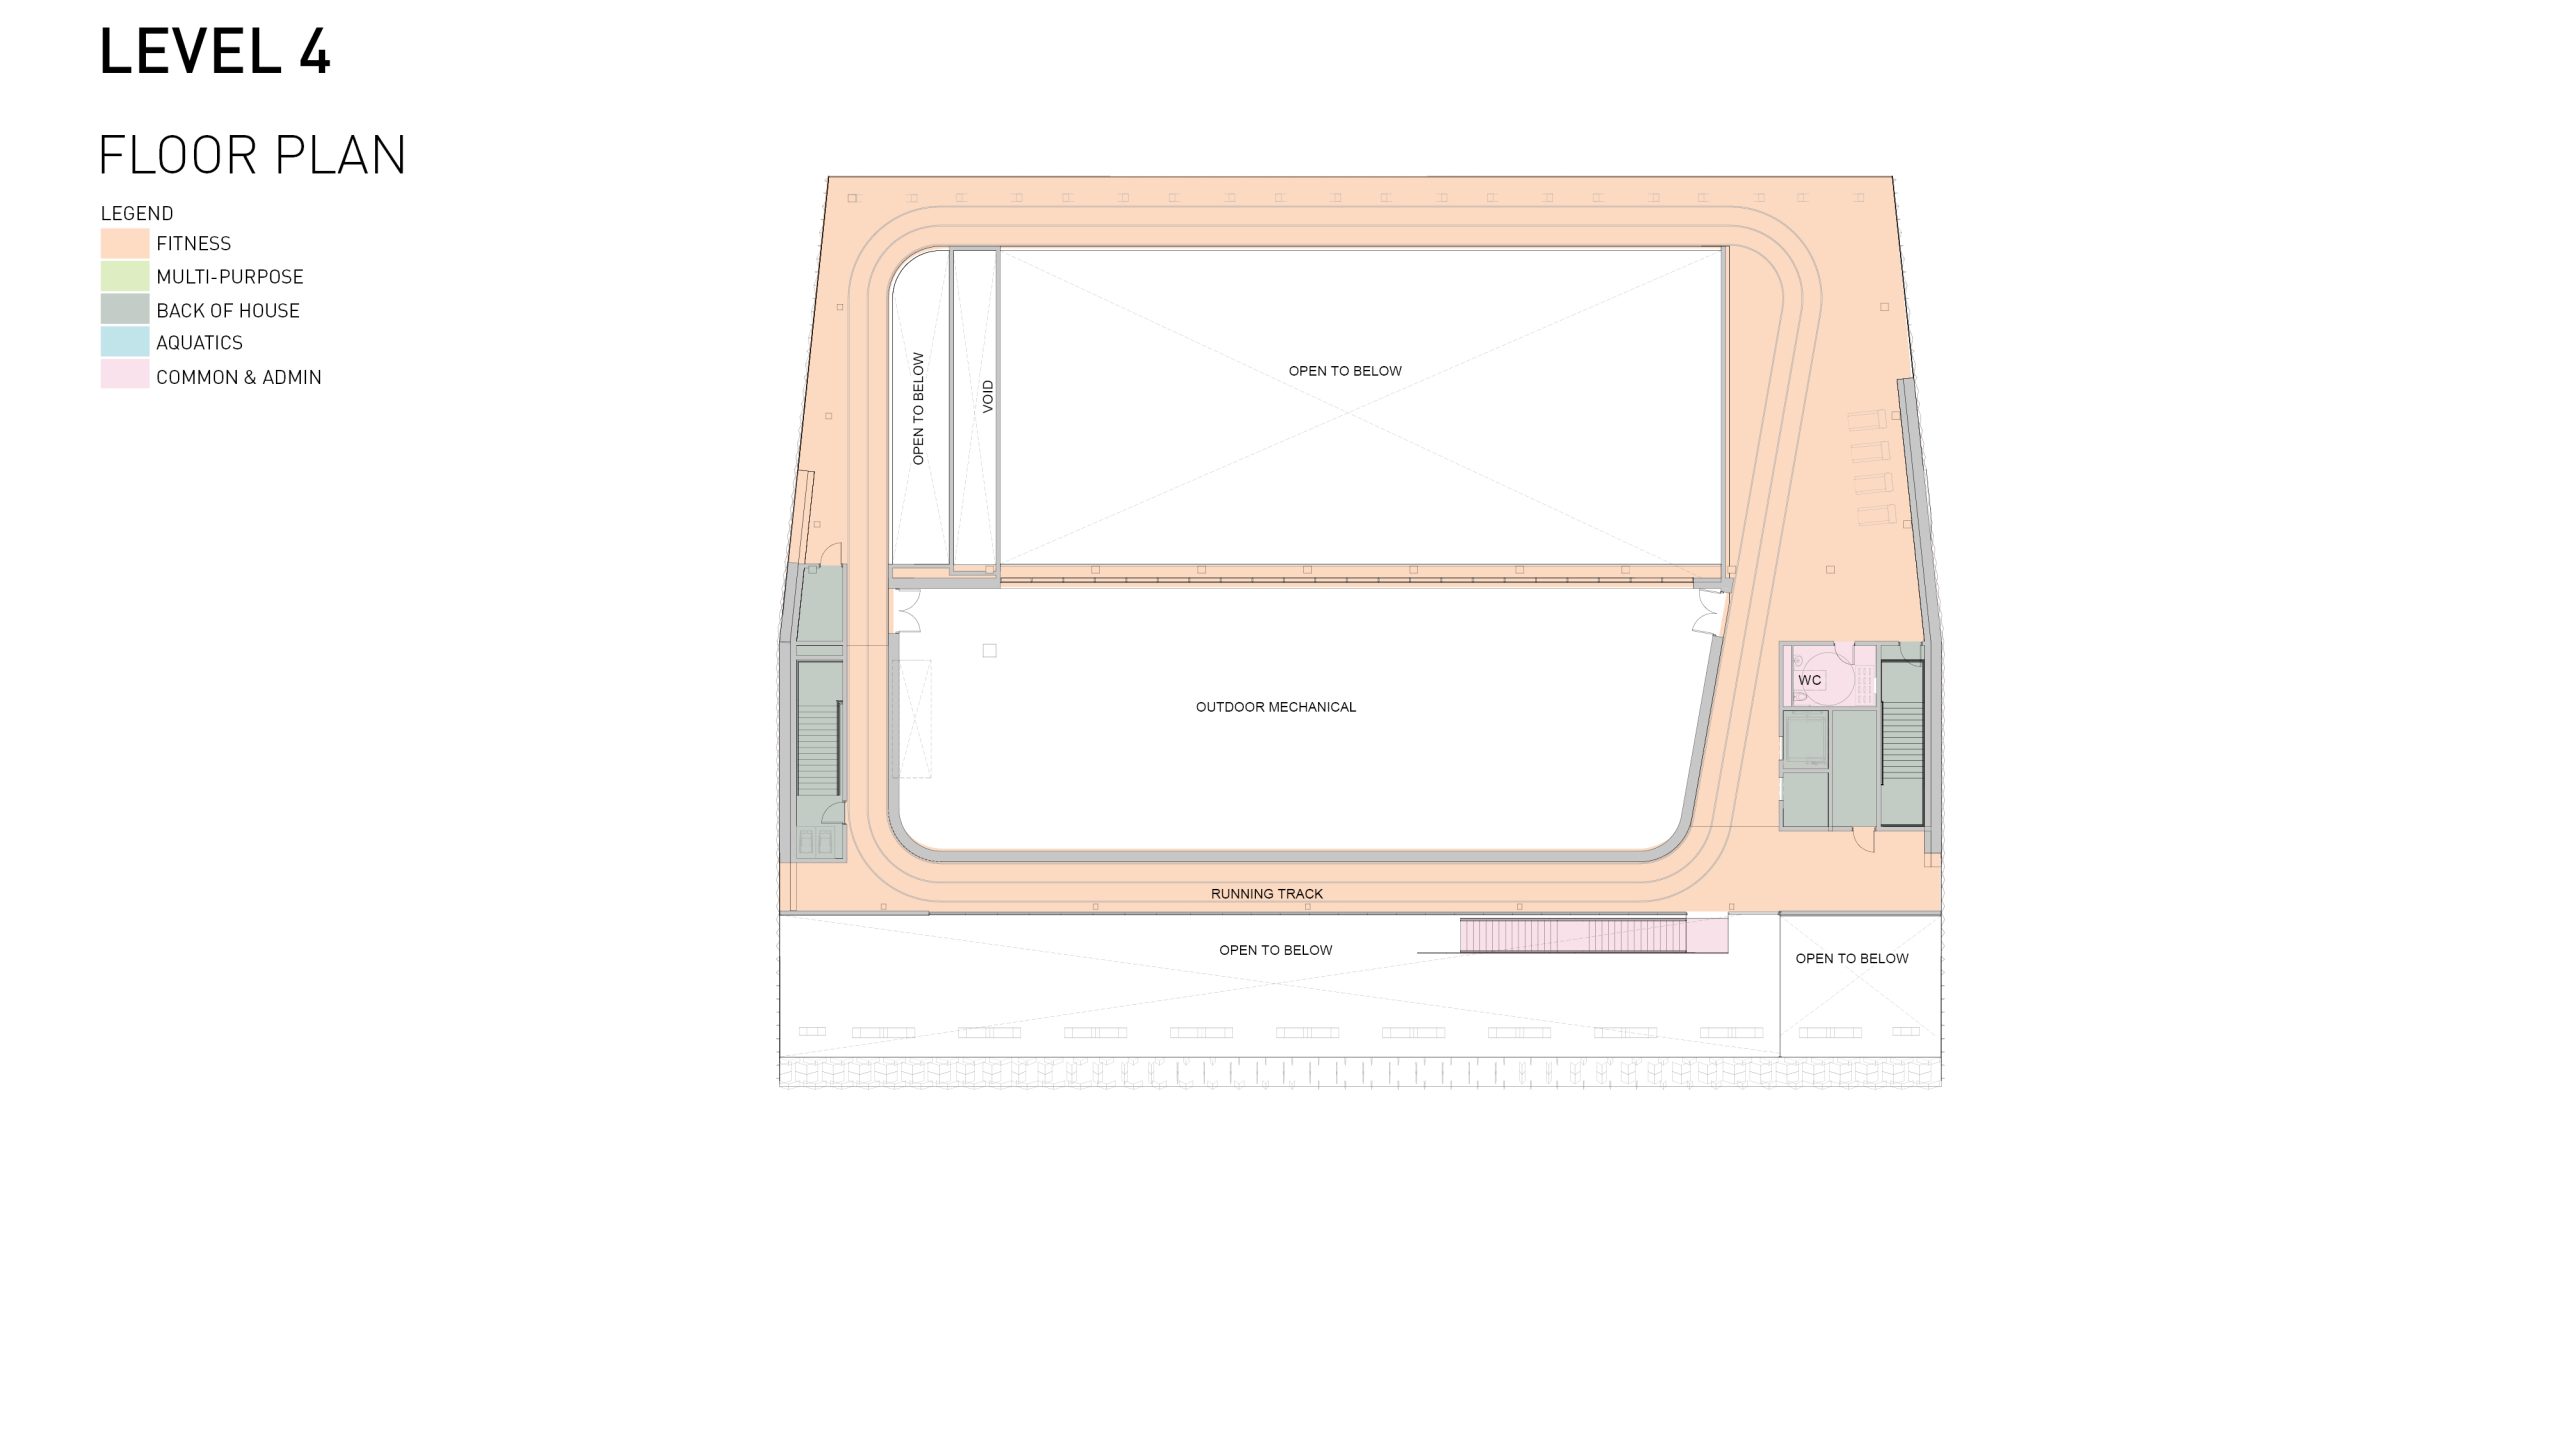 The floor plan for level 4 depicts a running track along the perimeter of the building and indicates that the space inside the running track is open to the floor below.